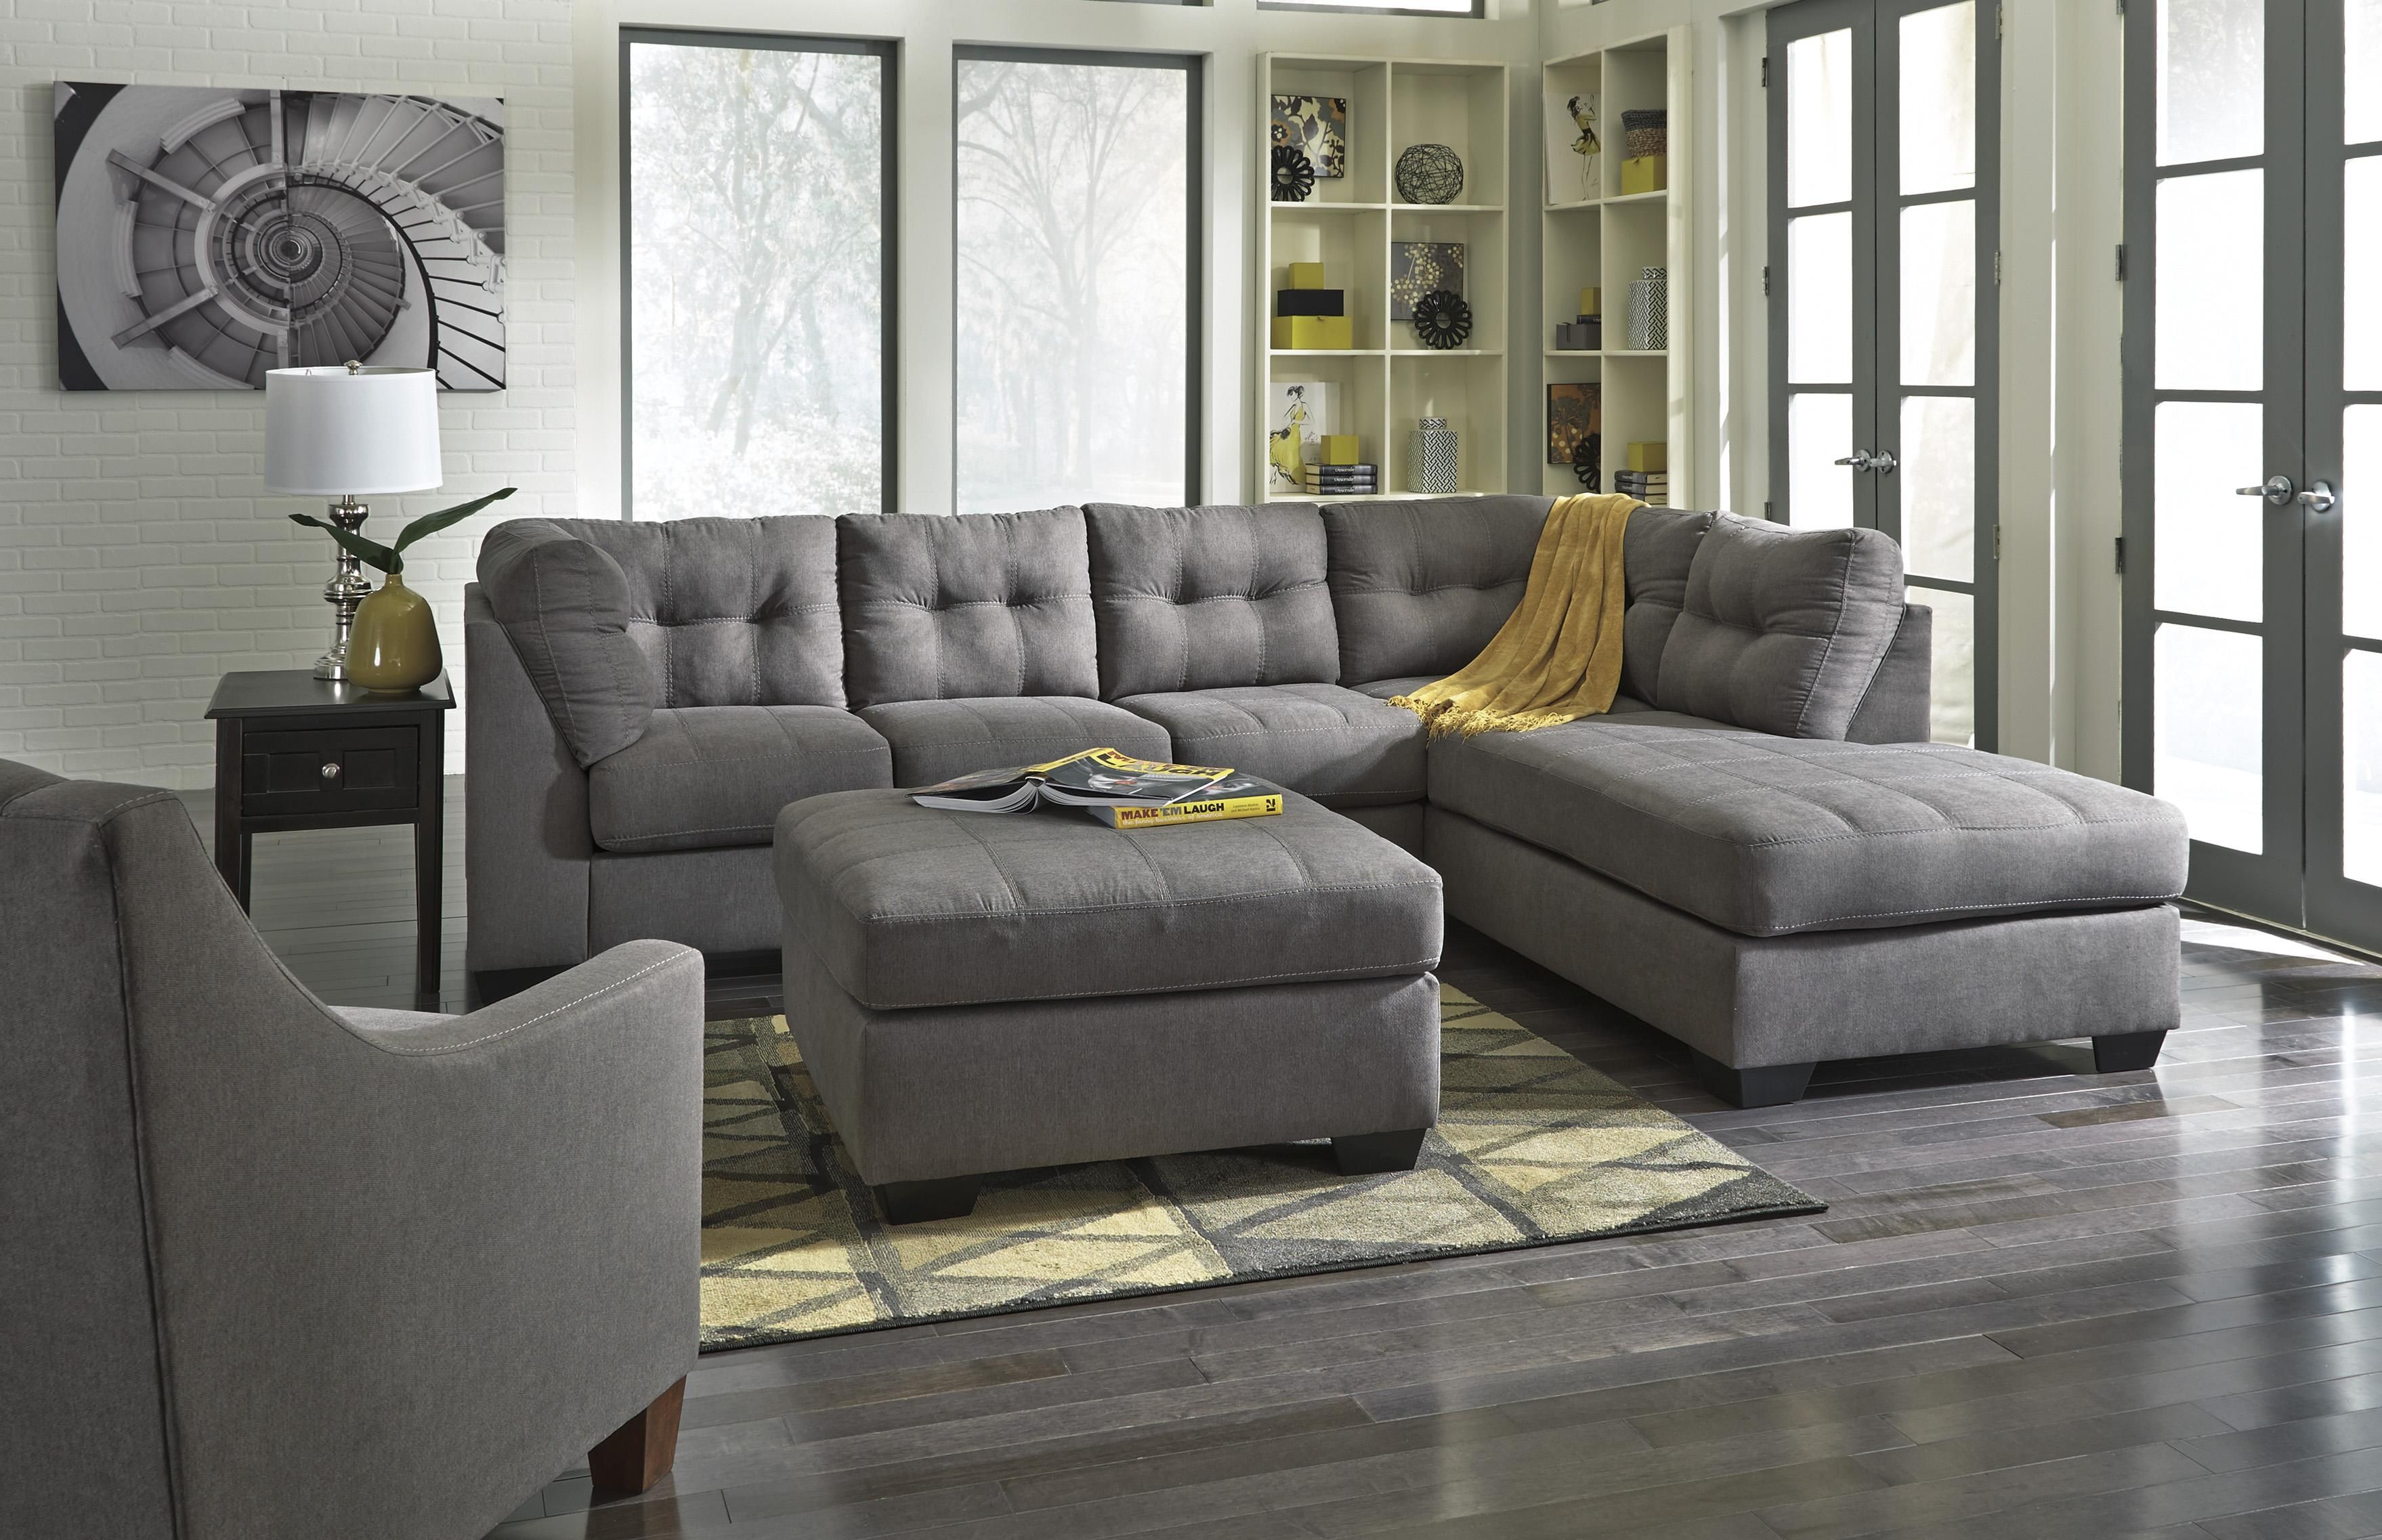 Decor Fascinating Benchcraft Sofa With Luxury Shapes For Living Intended For Berkline Sectional Sofa (Photo 12 of 12)